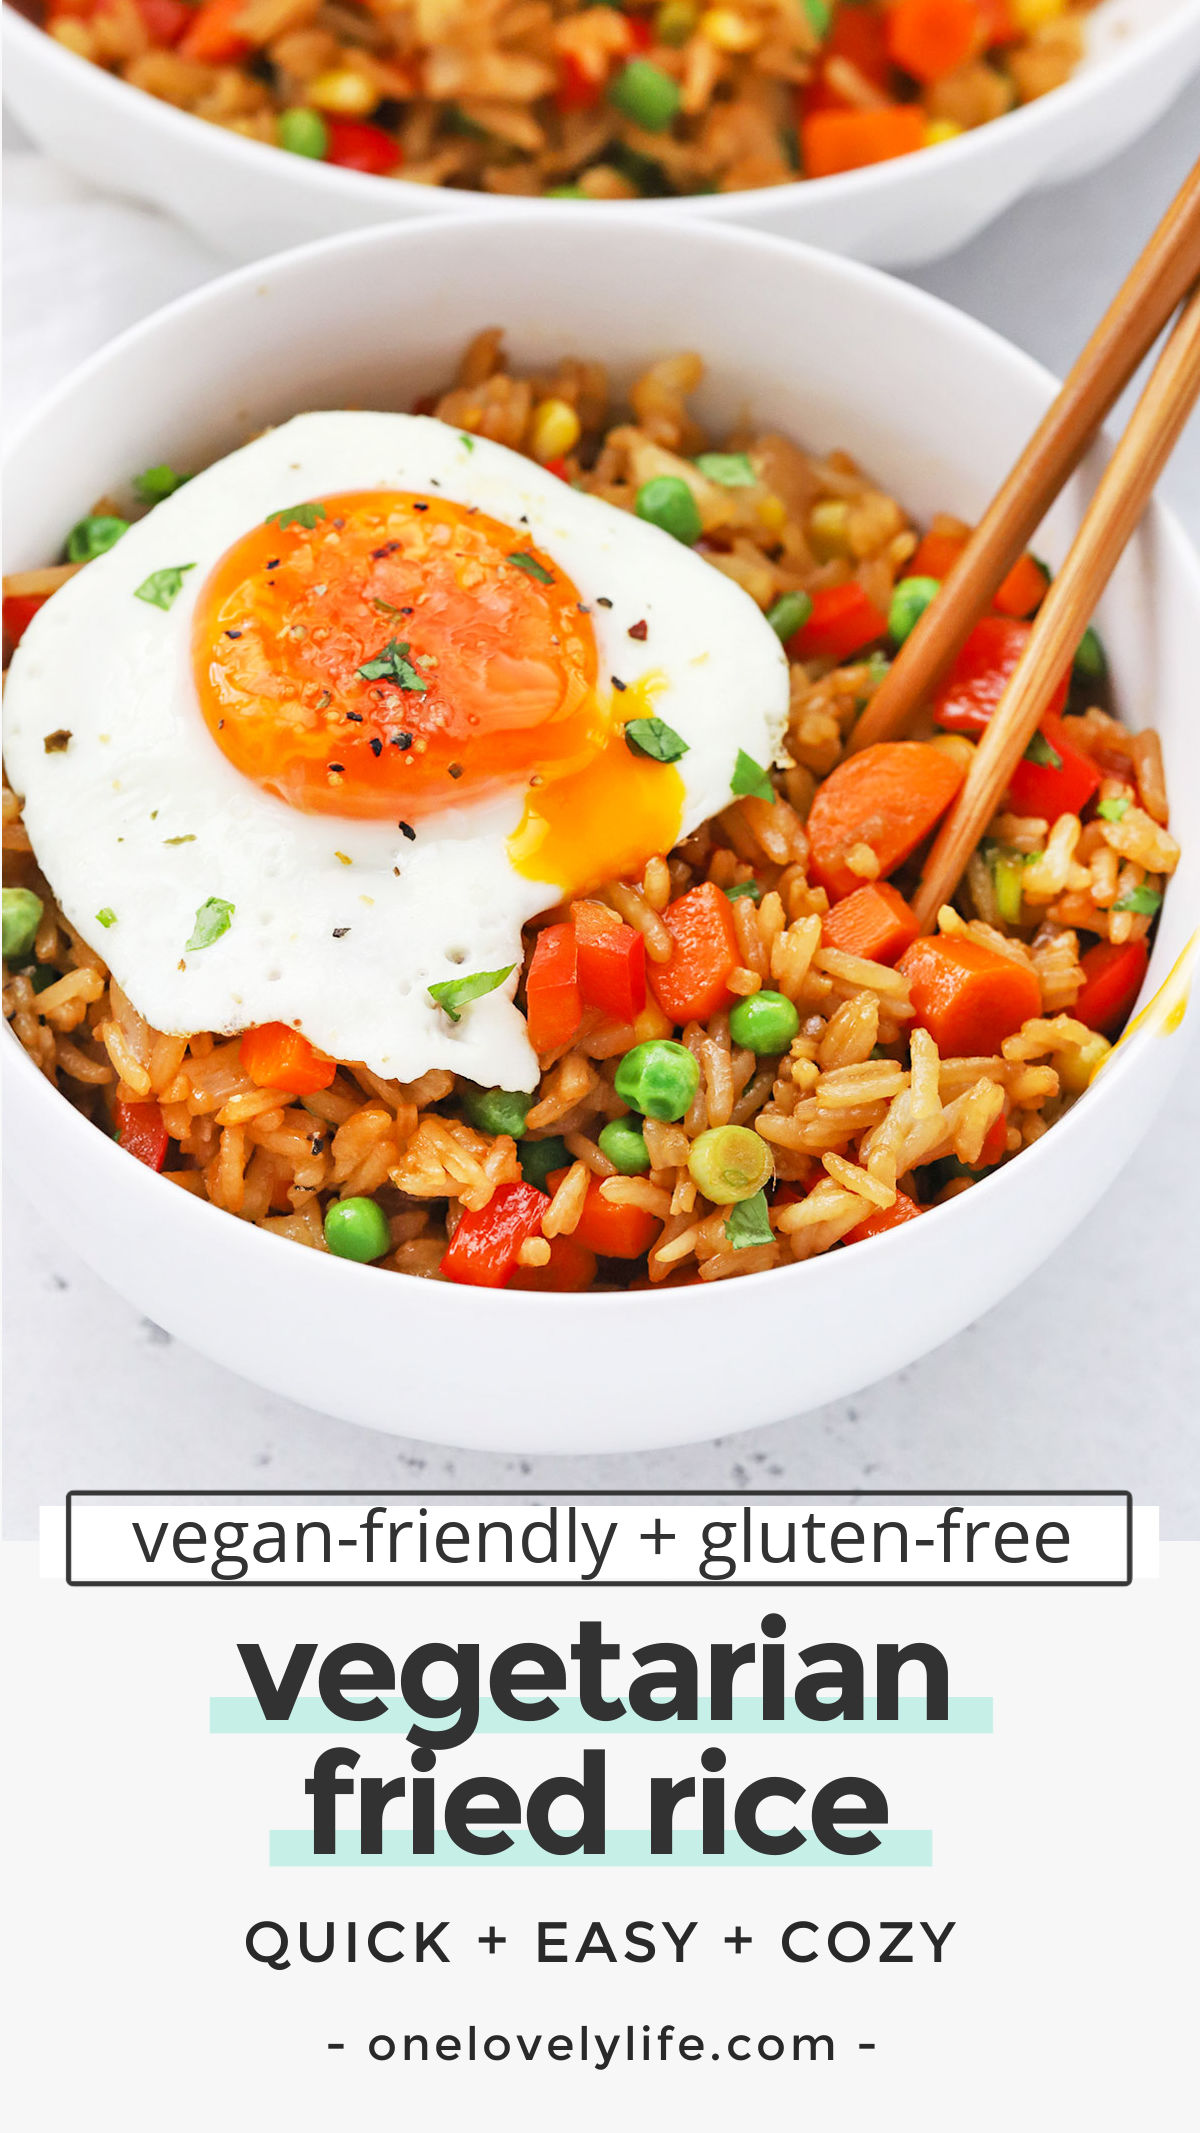 Vegetarian Fried Rice - This healthy fried rice recipe is loaded with colorful veggies and delicious flavor. Serve as a side with all your favorites! (Vegan-Friendly, Gluten-Free) // Vegan Fried Rice // Gluten Free Fried Rice // Easy Dinner // Quick Dinner // Take Out Fake Out // Takeout Copycat Fried Rice